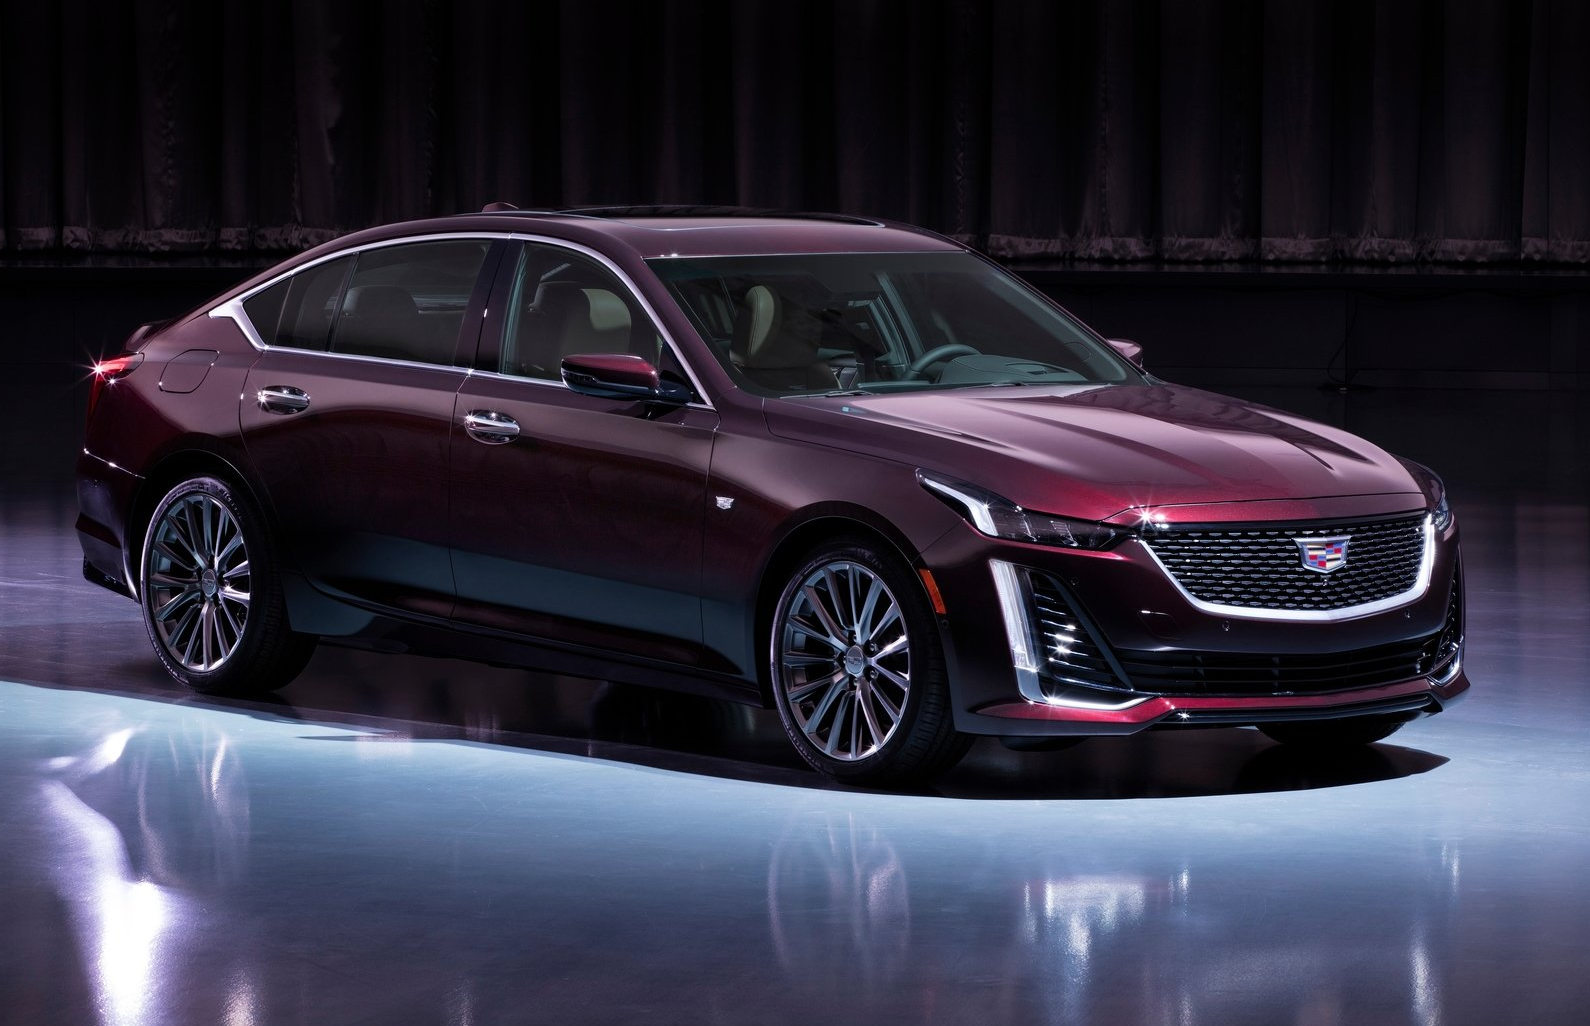 2020 Cadillac CT5: The Style of a Future Cadillac Icon